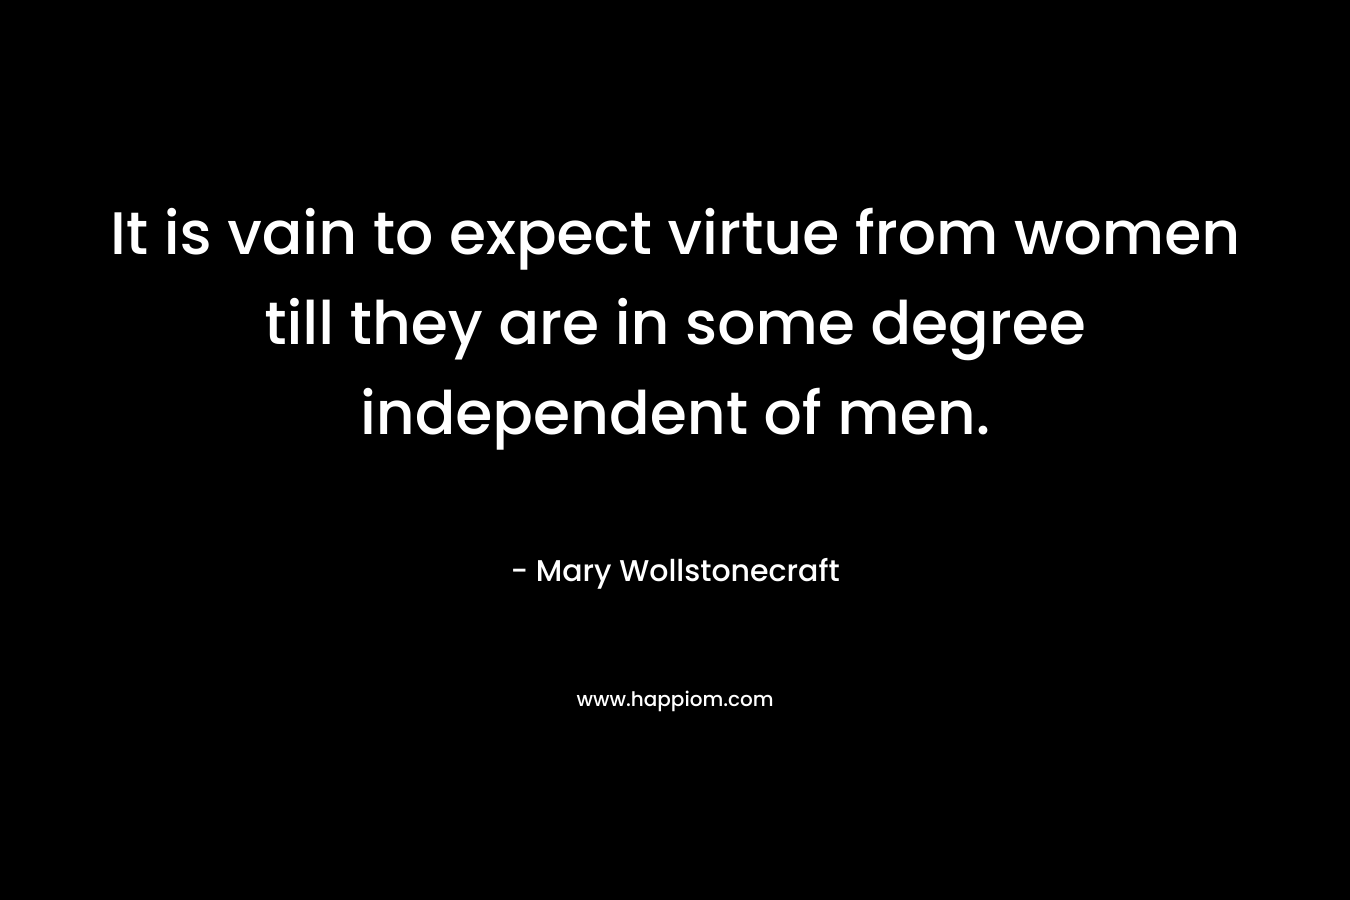 It is vain to expect virtue from women till they are in some degree independent of men. – Mary Wollstonecraft